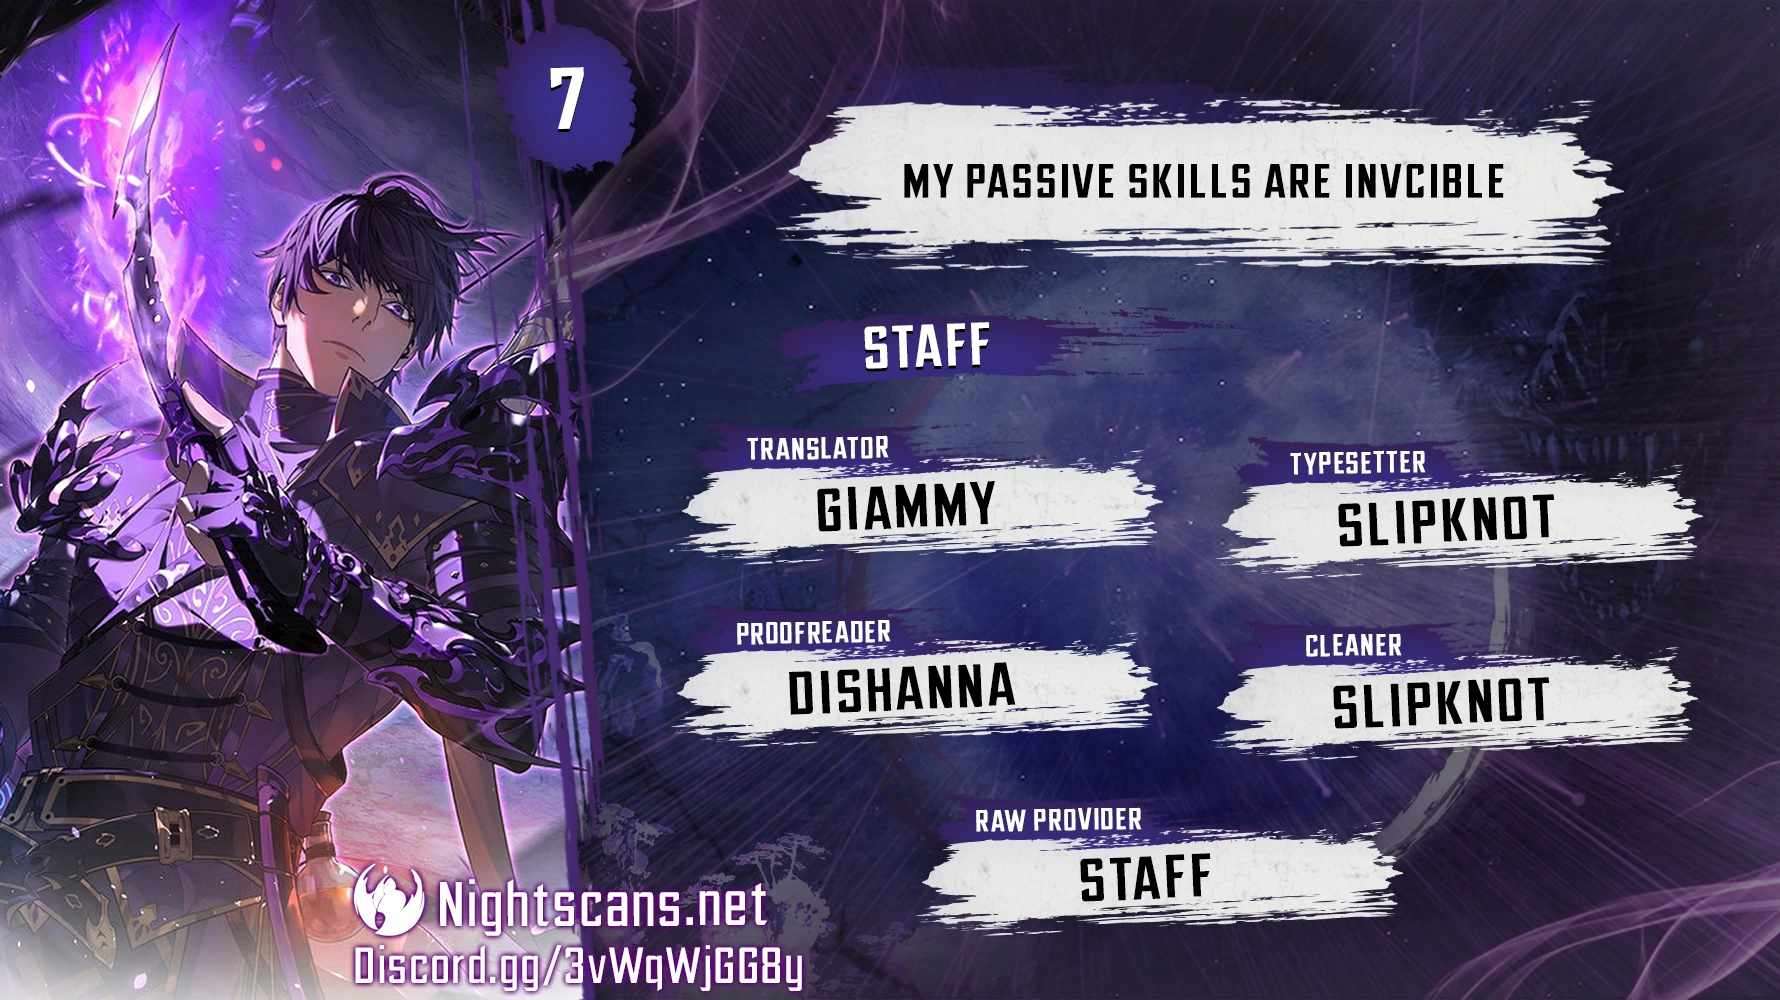 I Rely On My Invincibility To Deal Tons Of Damage Passively! - chapter 7 - #1